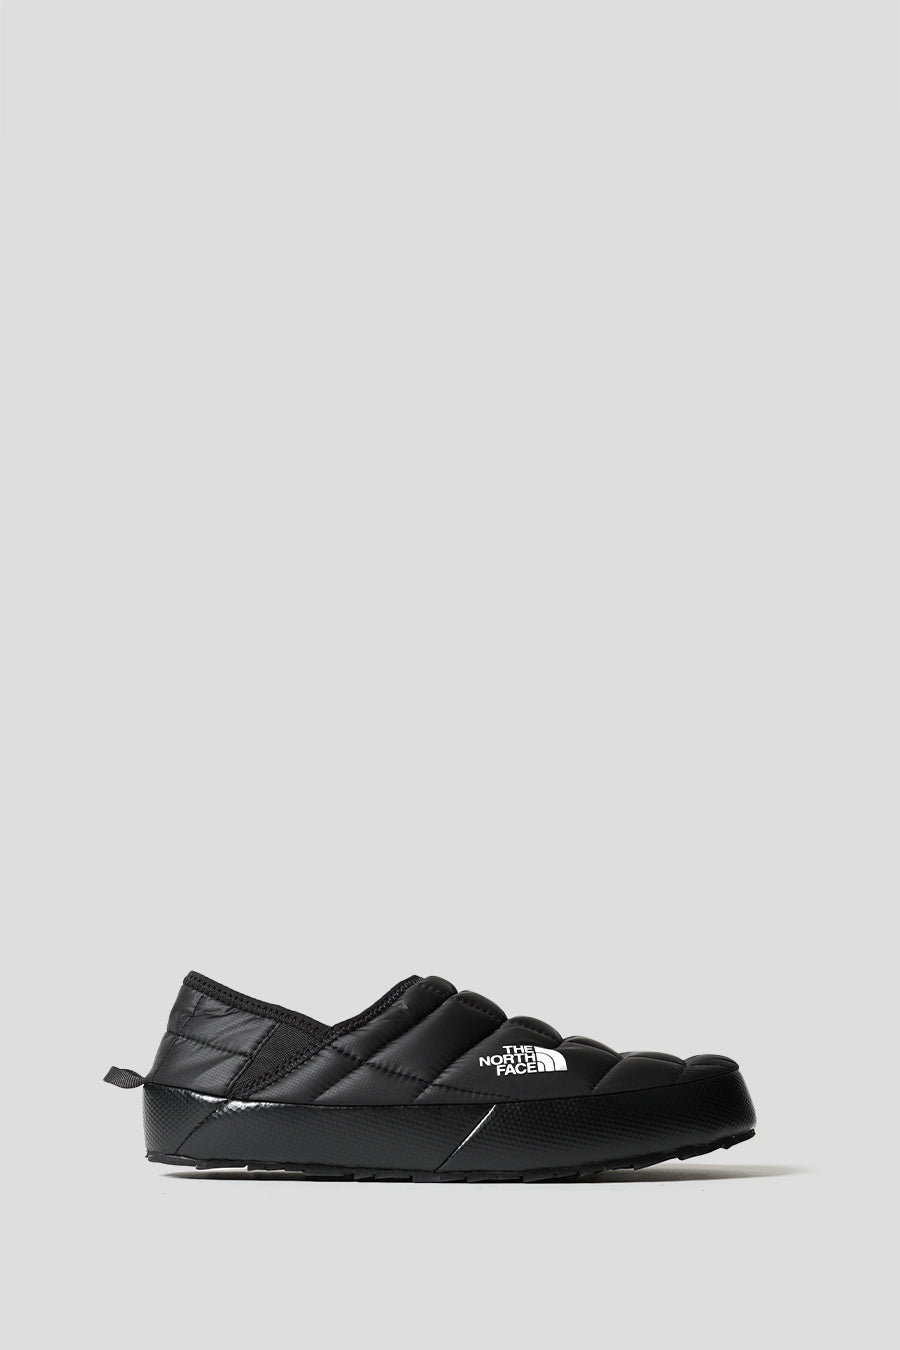 The North Face - BLACK AND WHITE THERMOBALL TRACTION MULE V SNEAKERS - LE LABO STORE